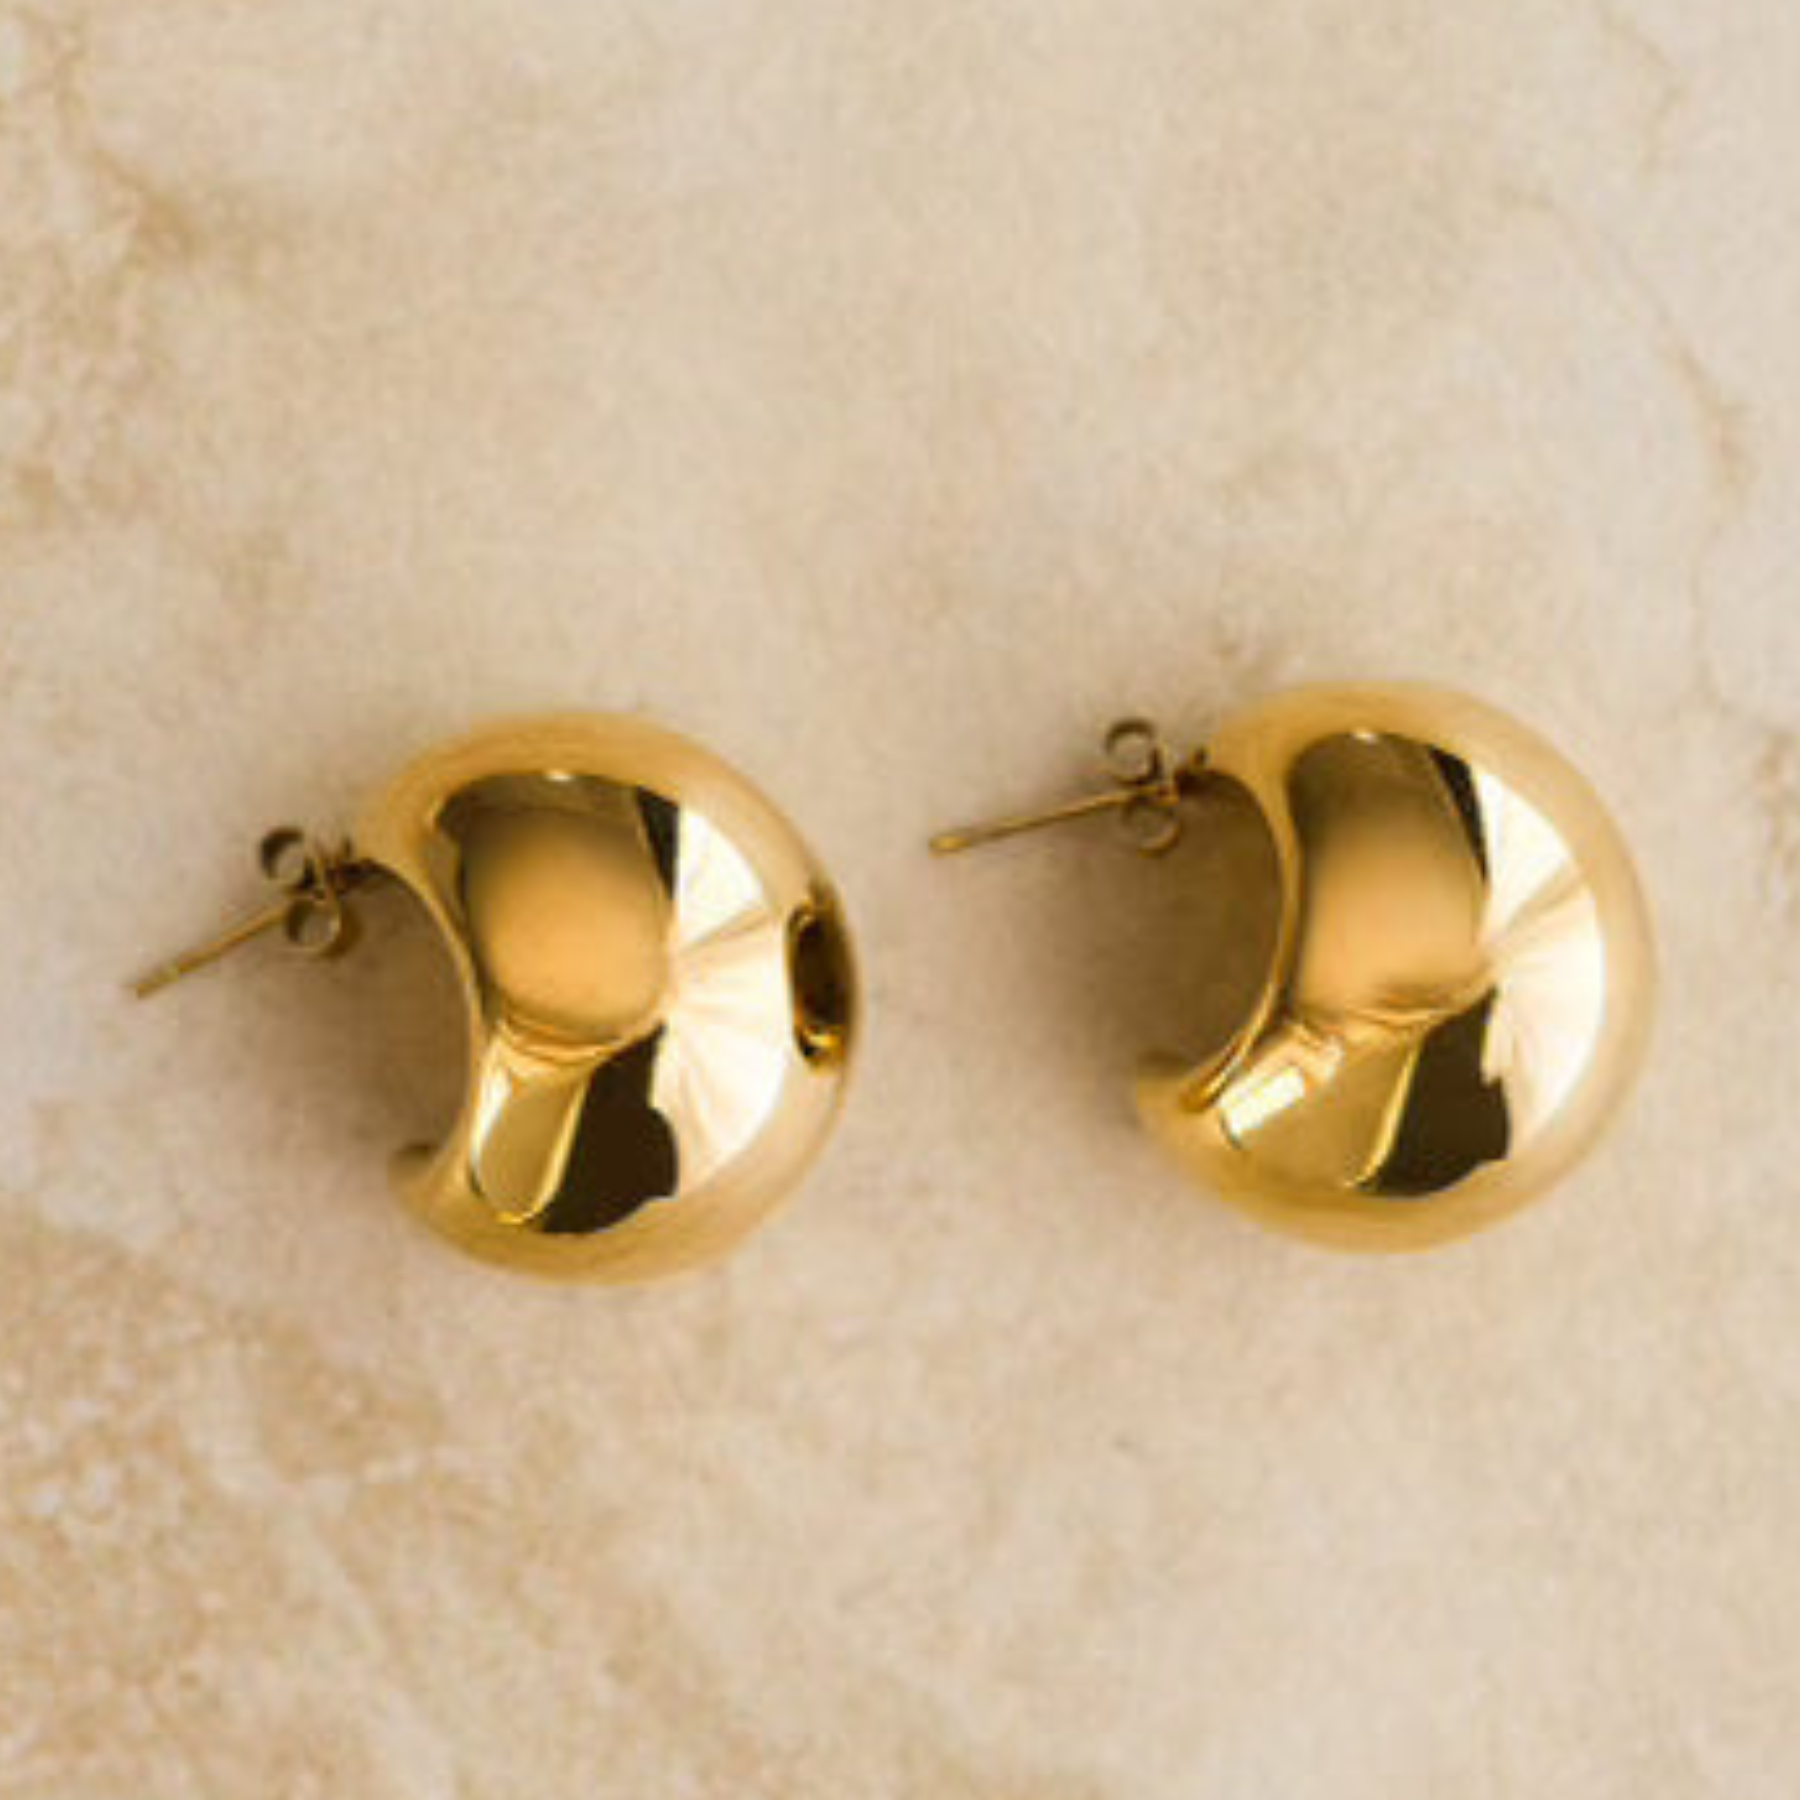 Round gold earrings from Indigo & Wolfe